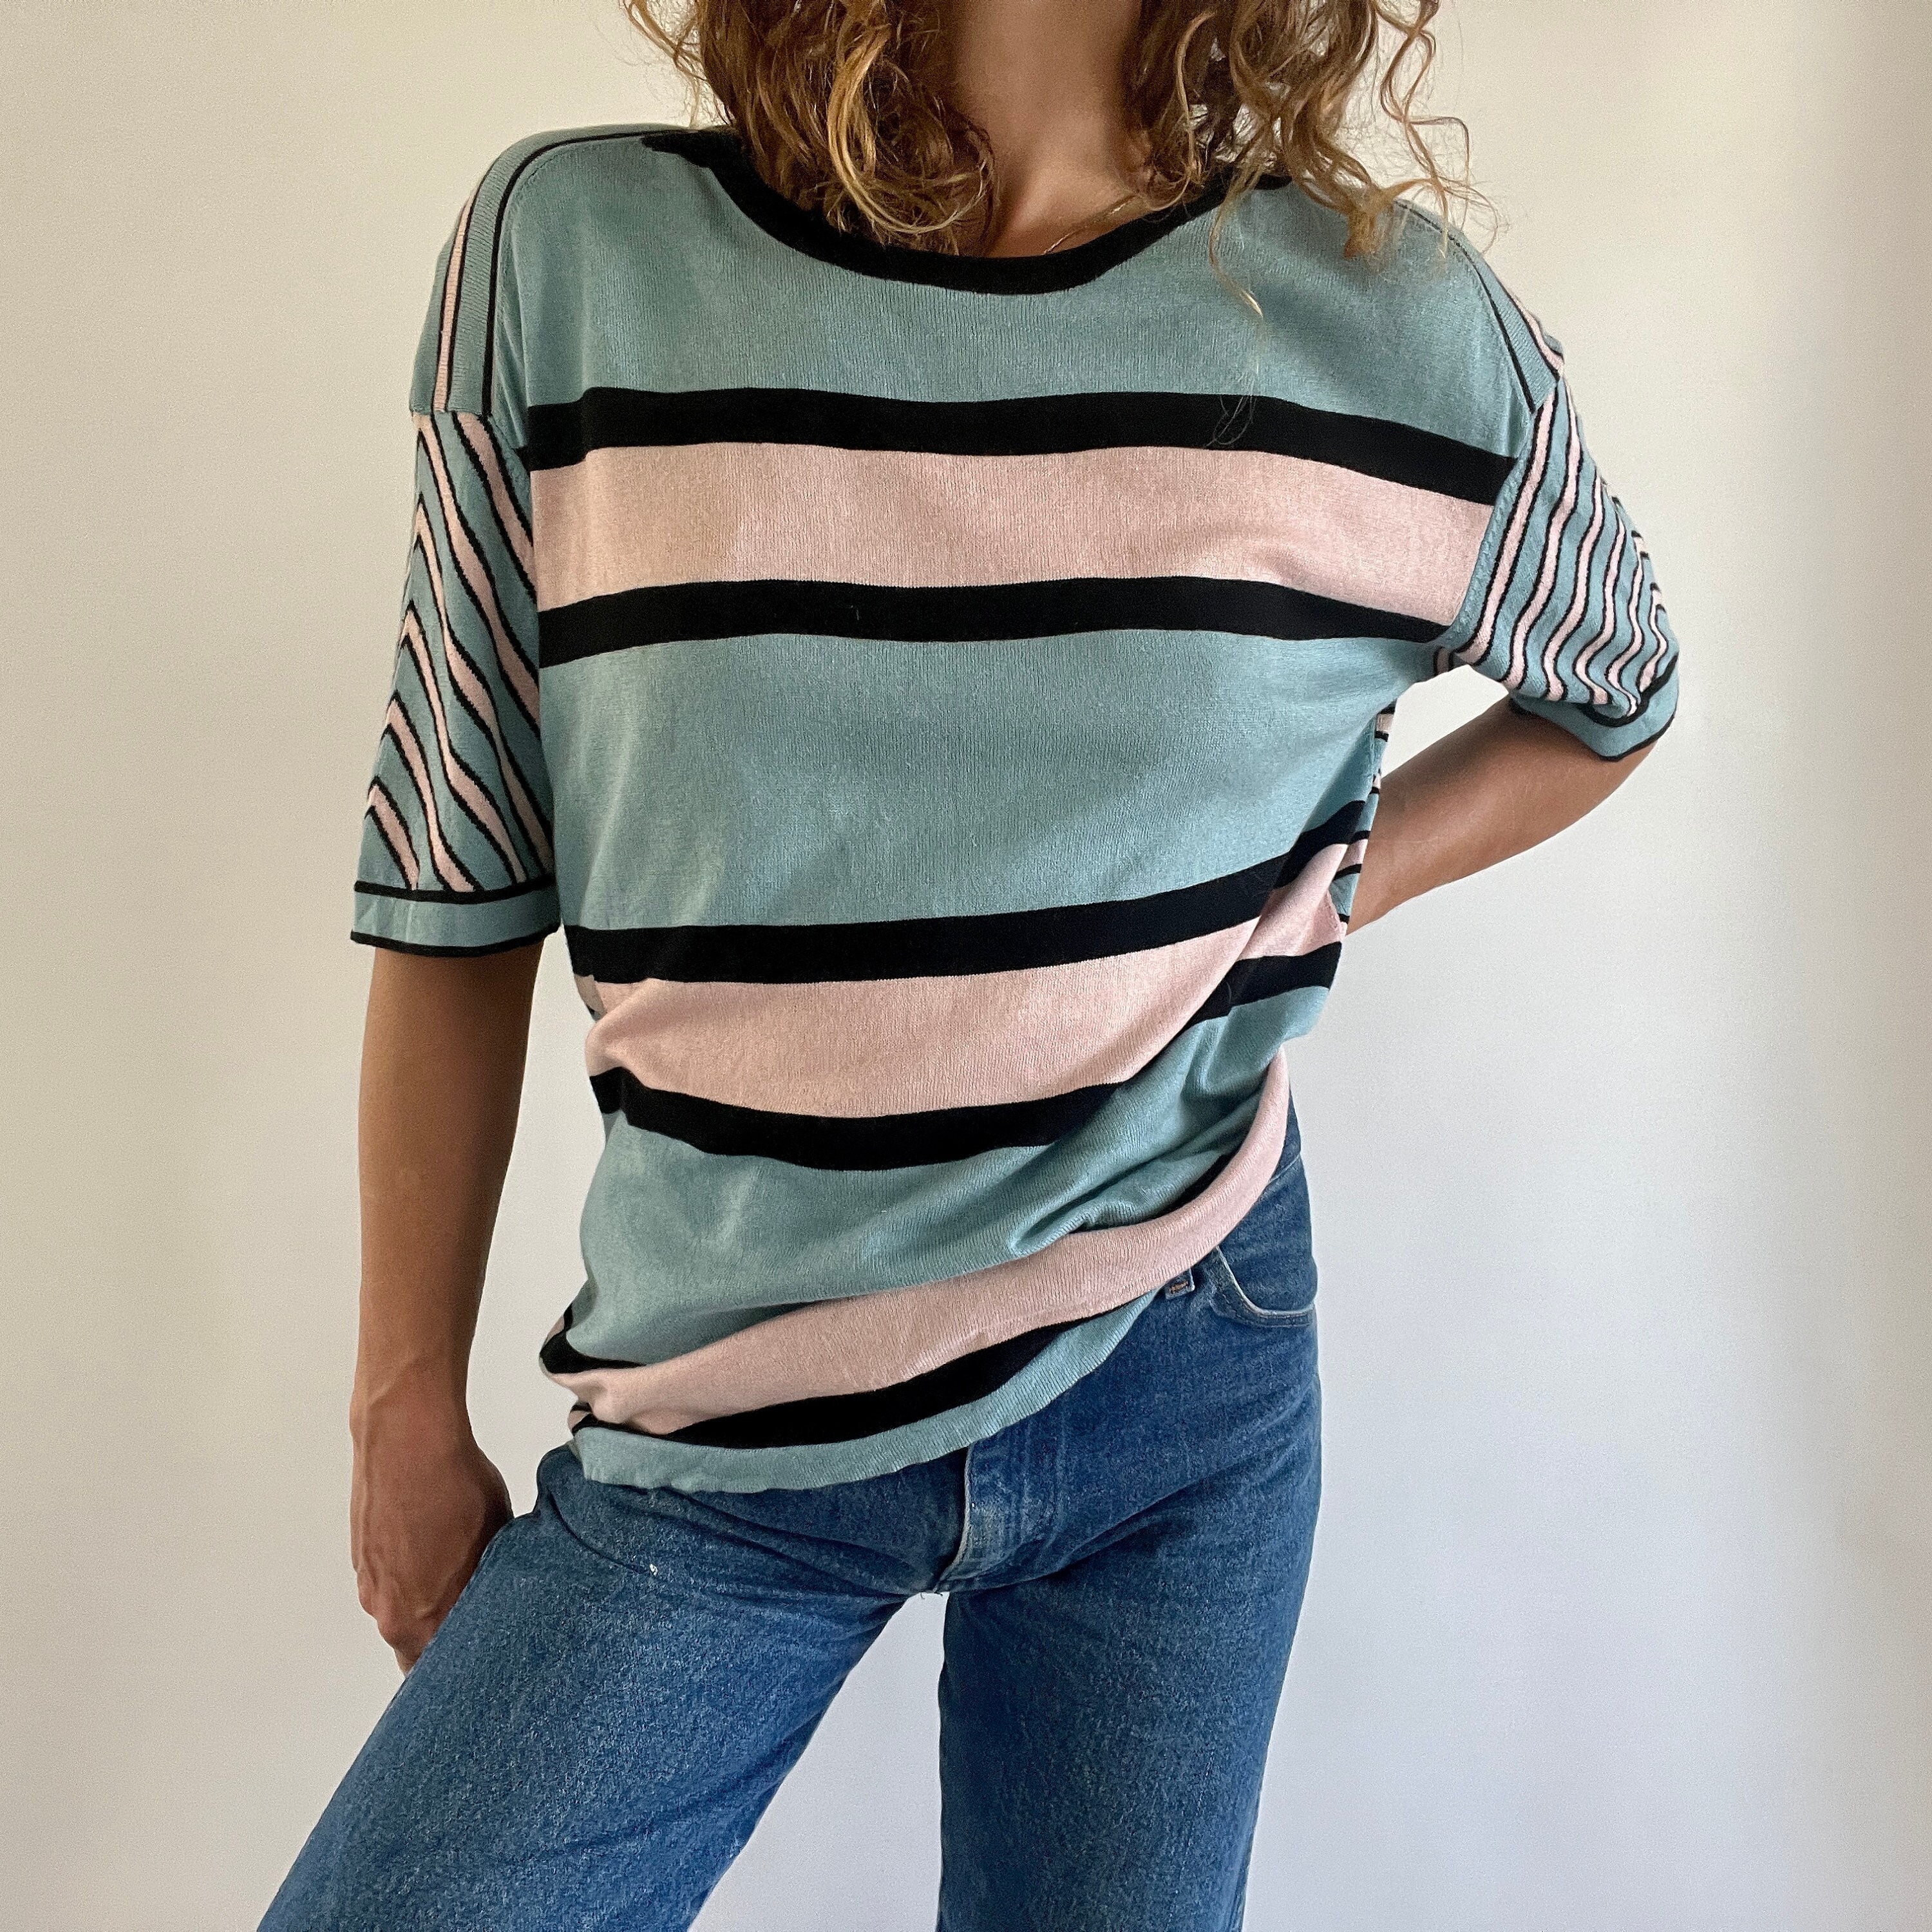 Chanel Striped Top 